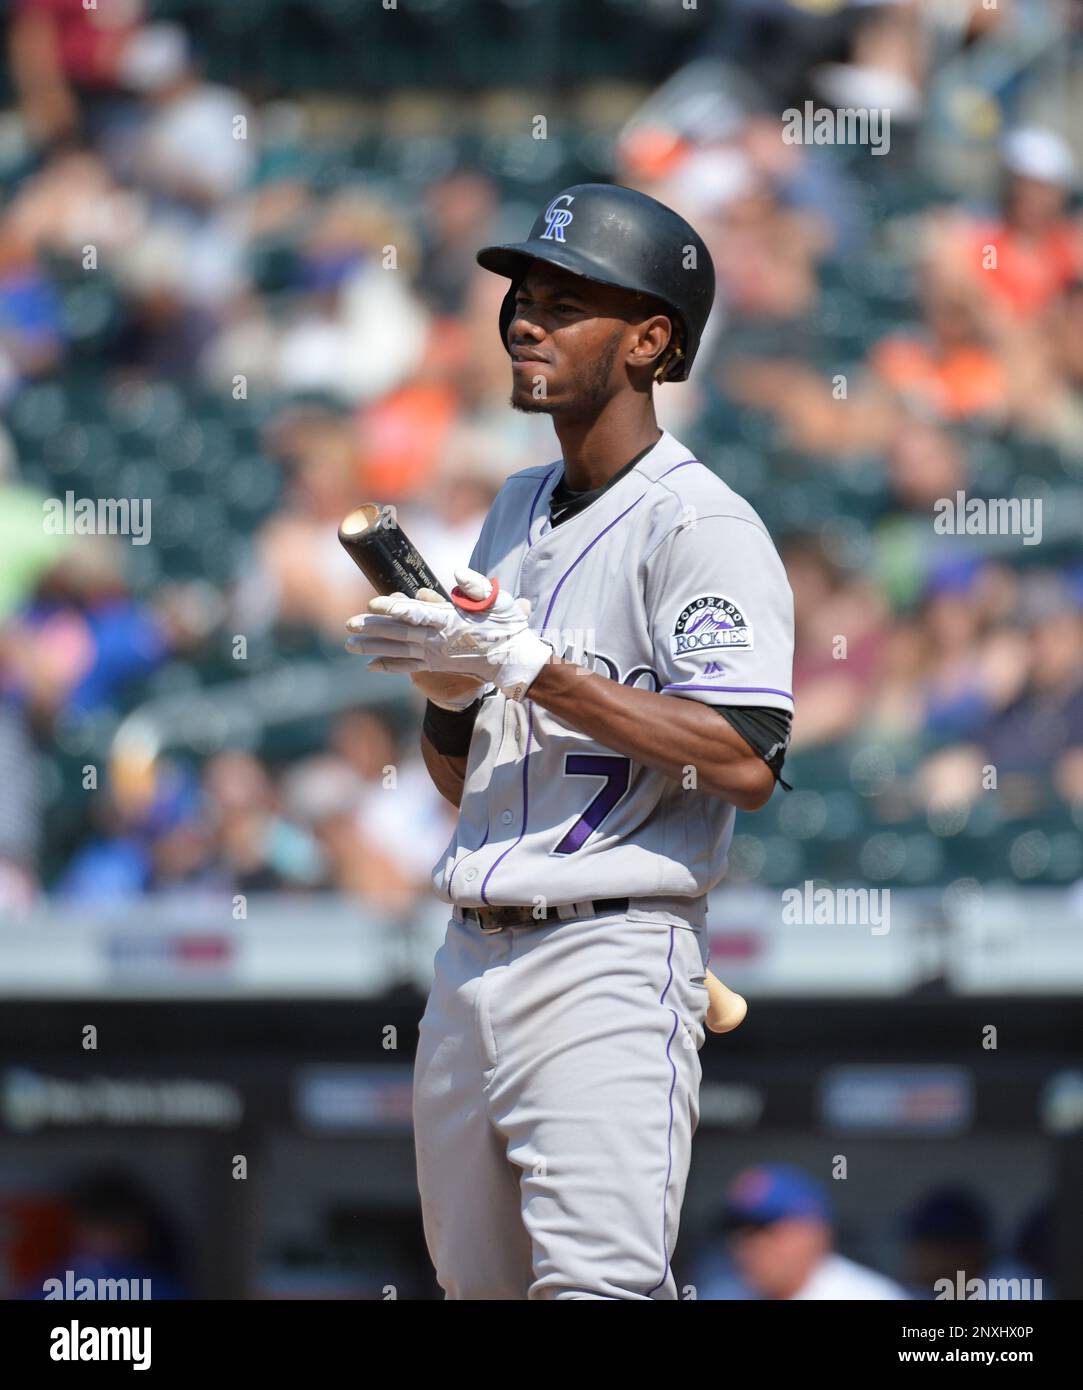 Colorado Rockies outfielder Raimel Tapia (7) during game against